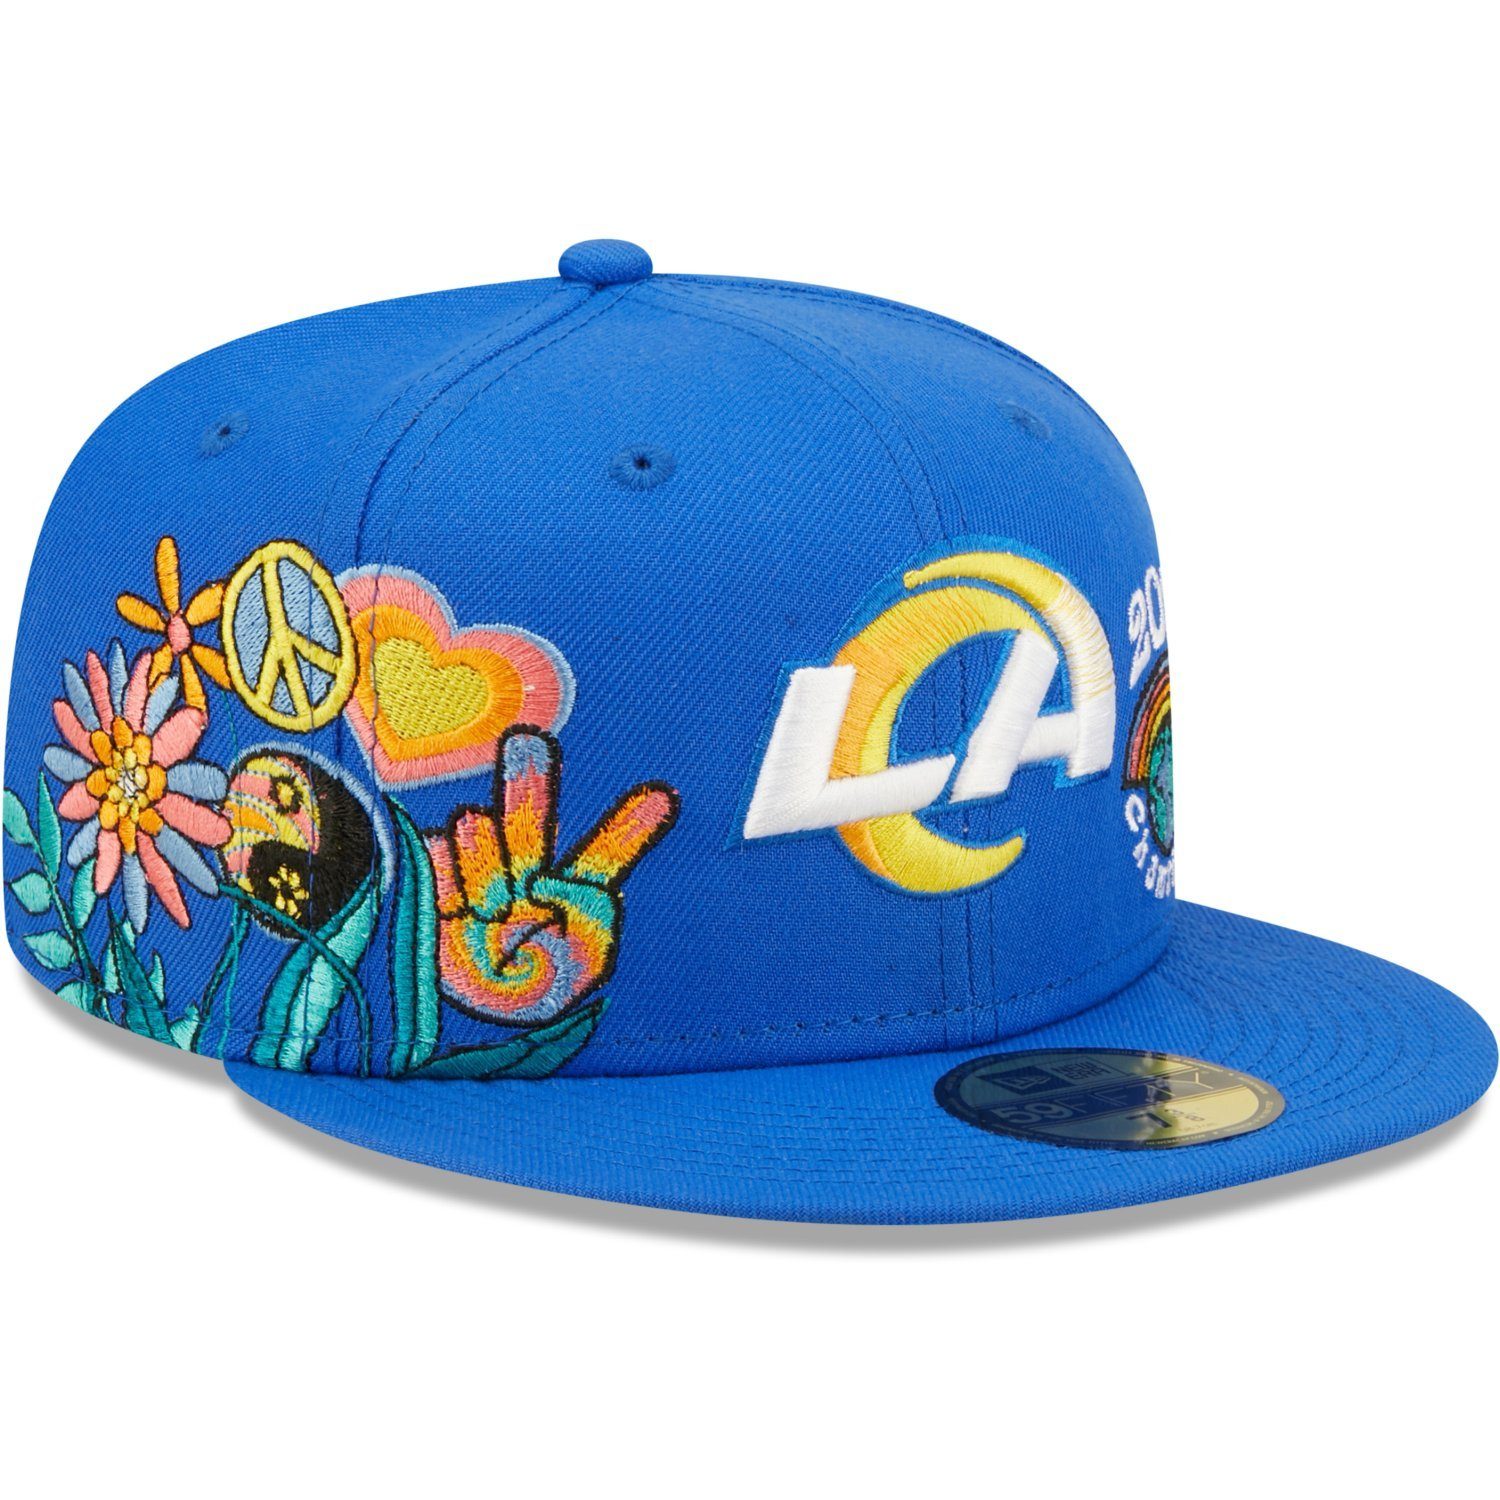 Cap New GROOVY Los Era 59Fifty Rams Angeles Fitted